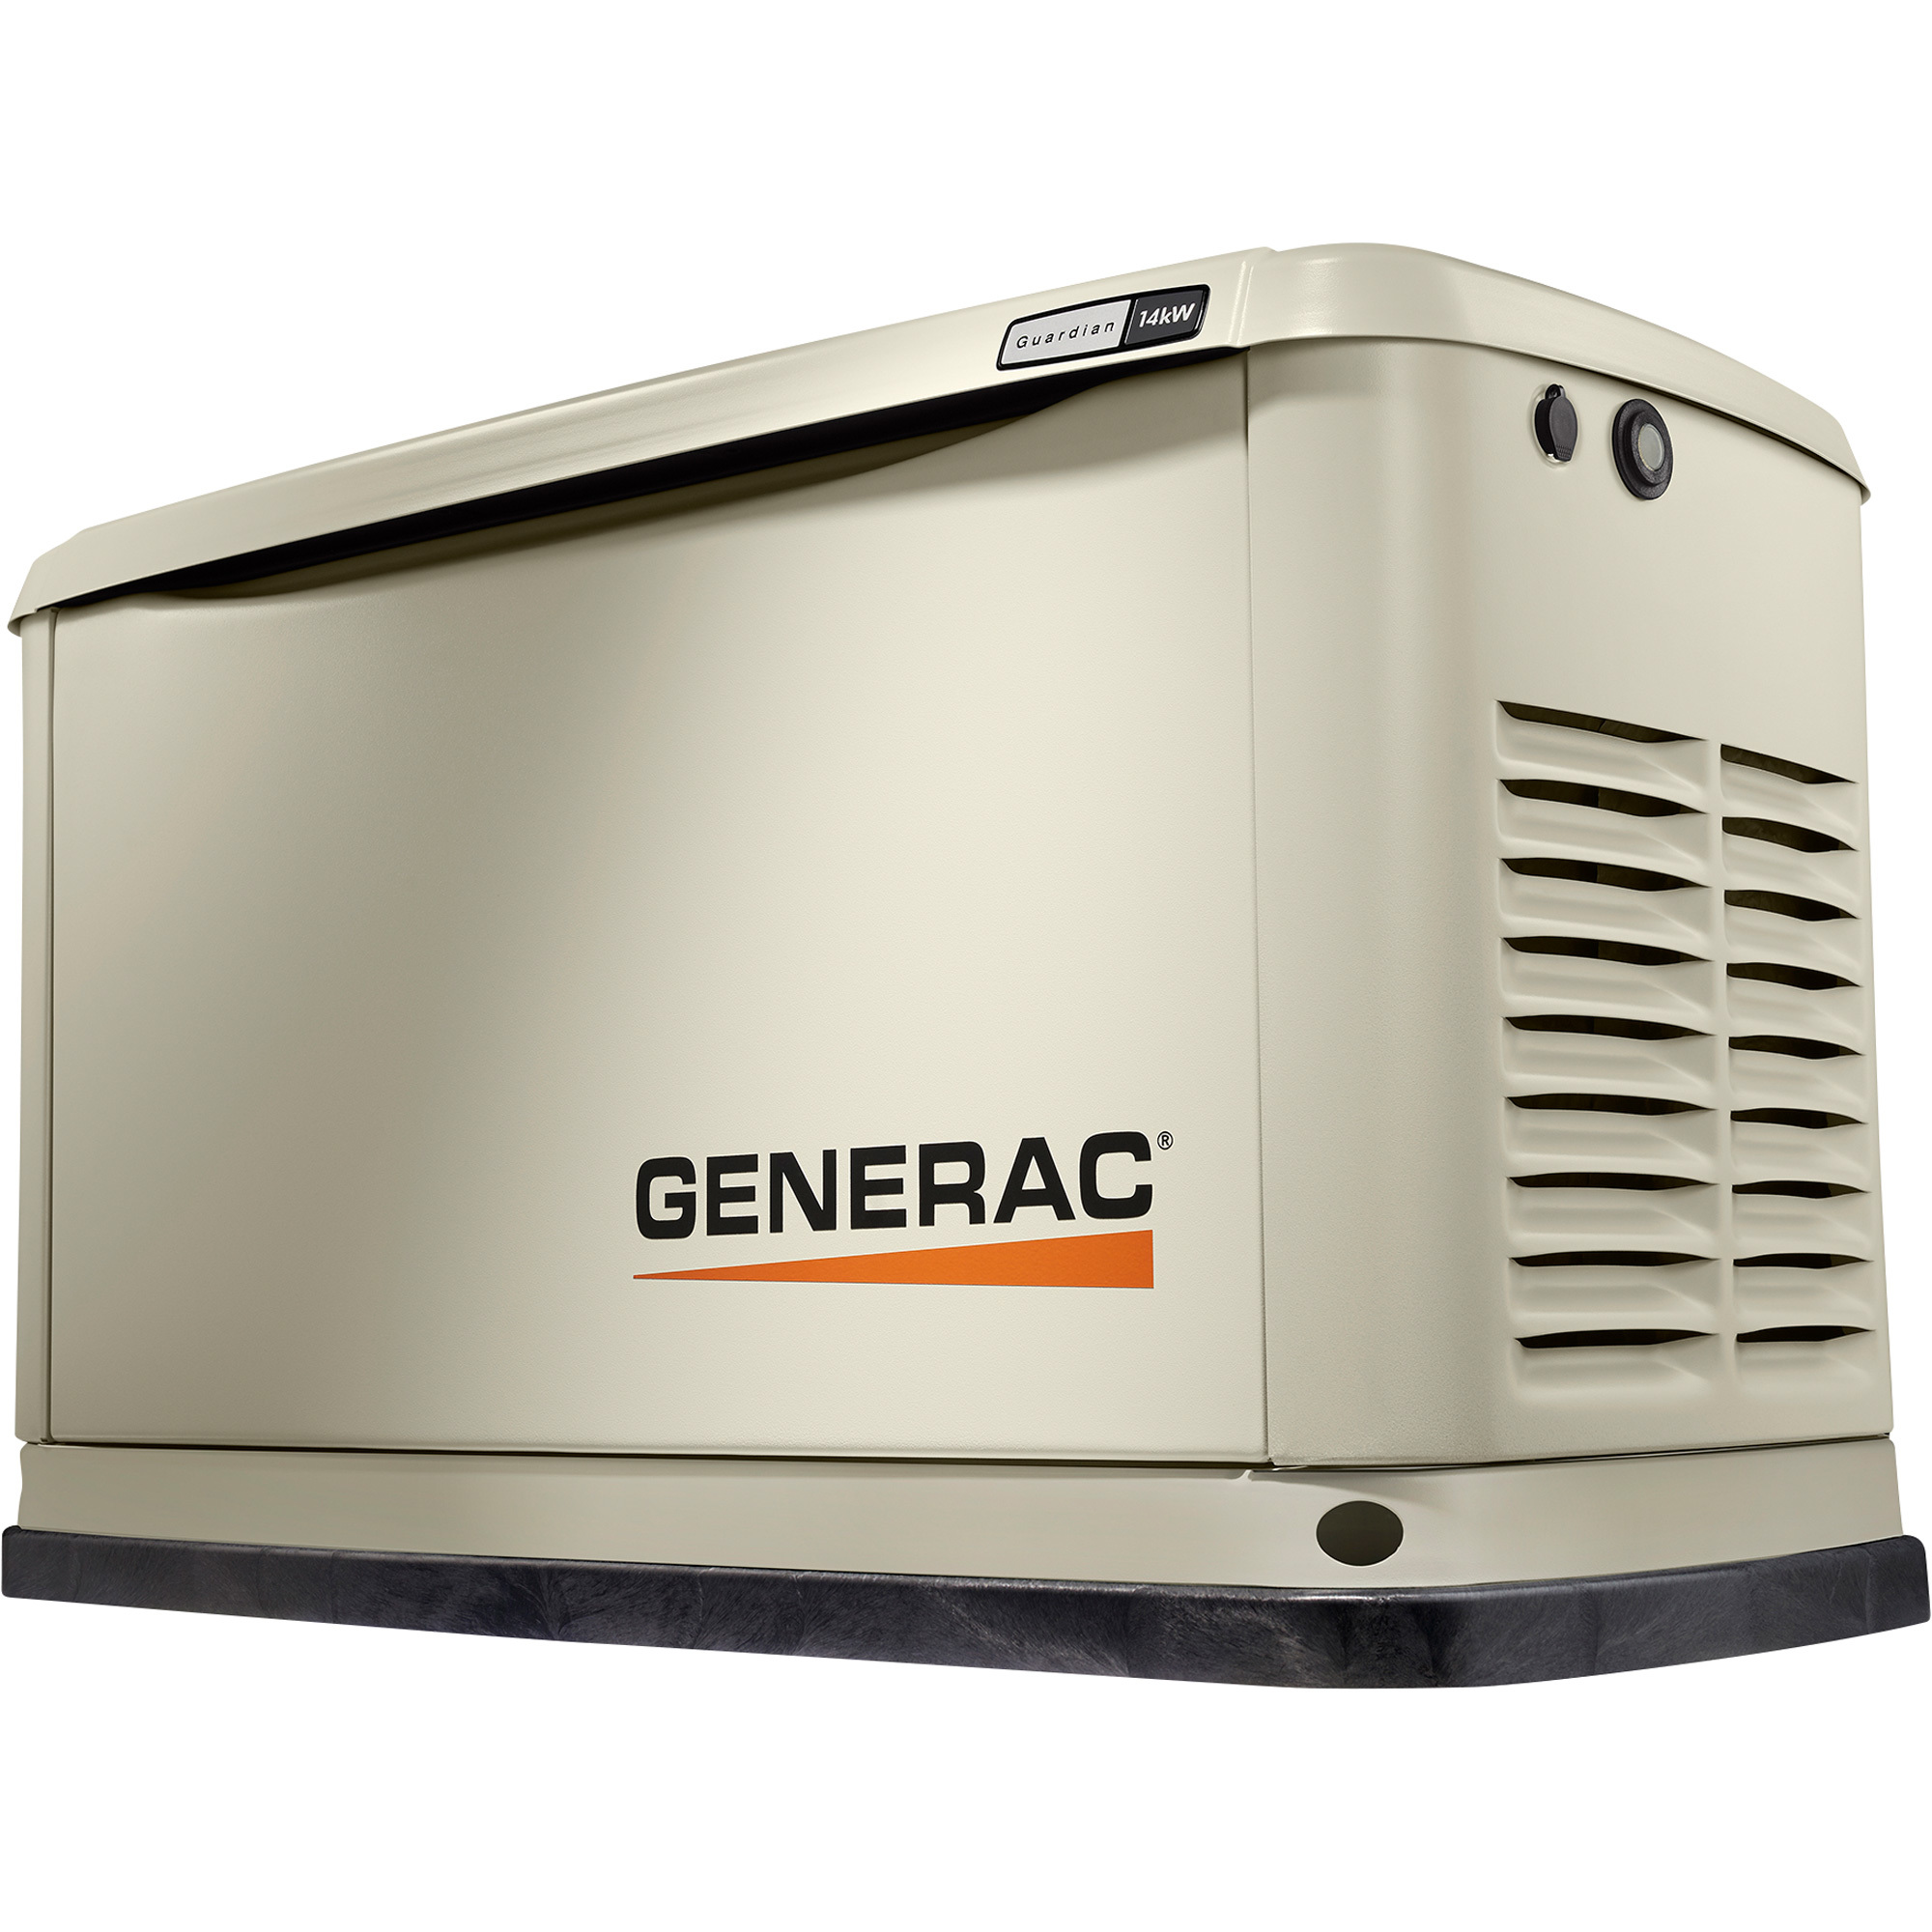 Generac Guardian Series Air Cooled Home Standby Generator 14kW (LP)/14kW (NG)